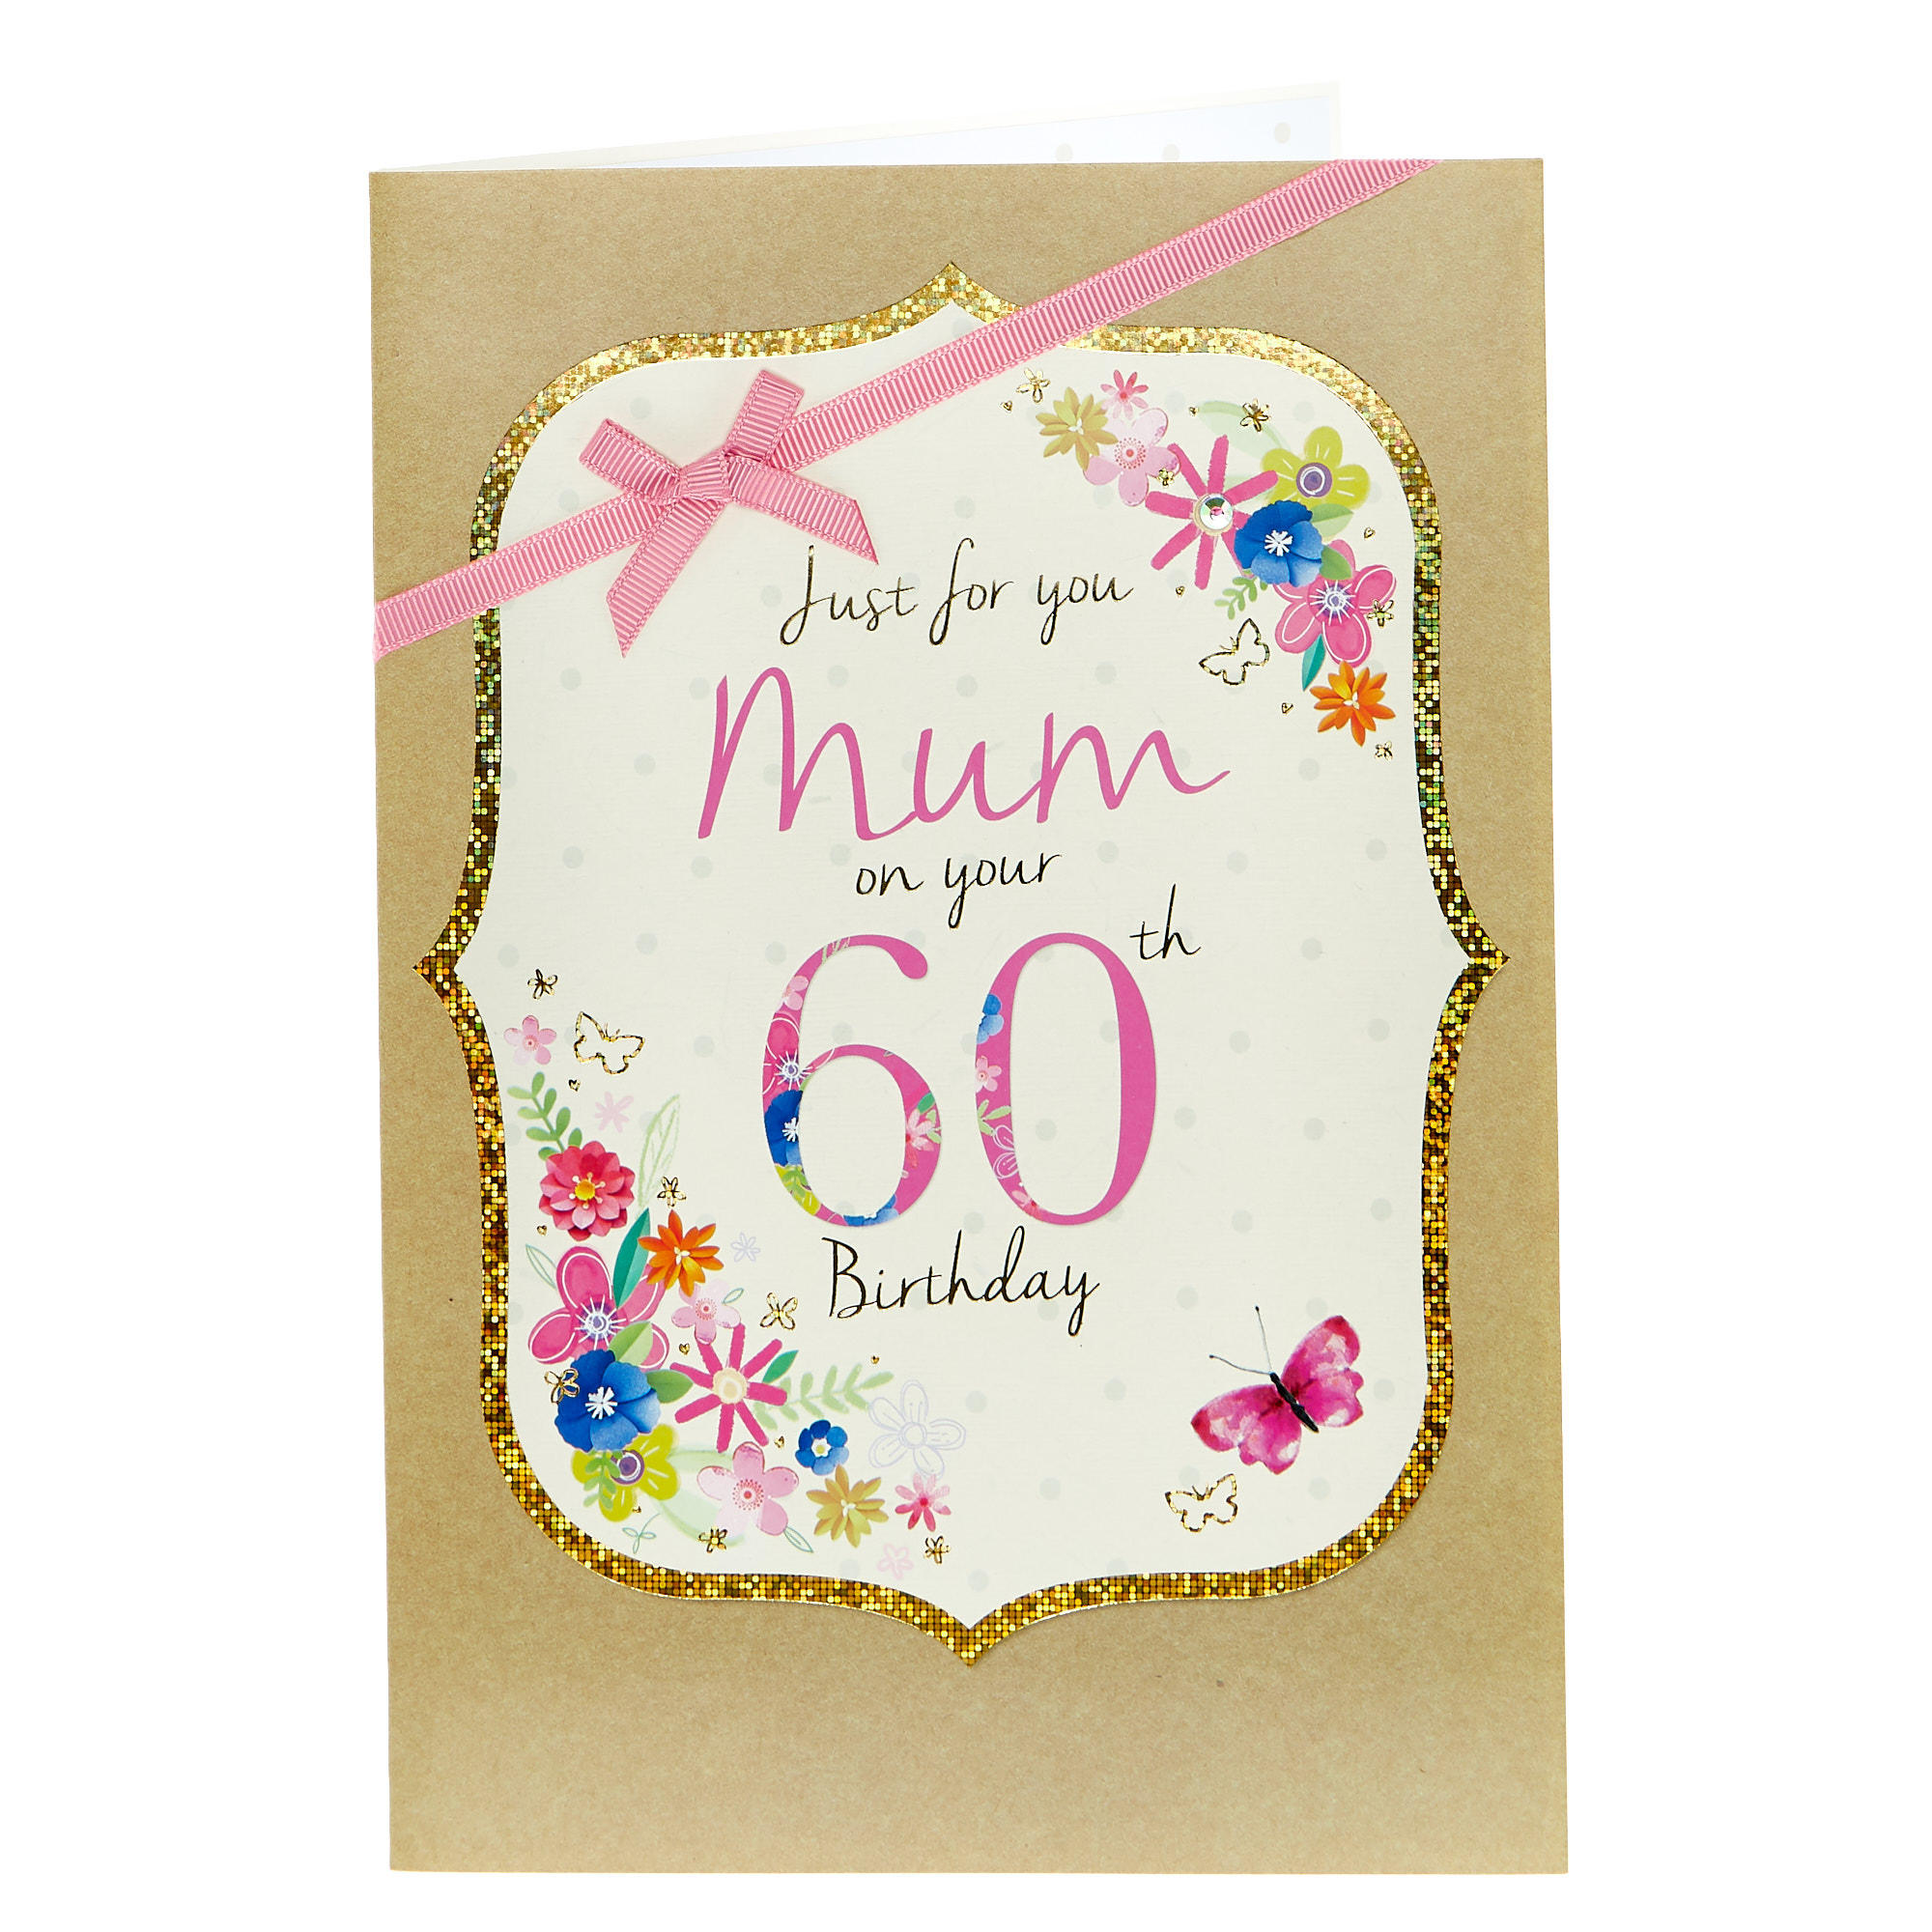 Buy 60th Birthday Card - Just For You Mum for GBP 1.99 | Card Factory UK